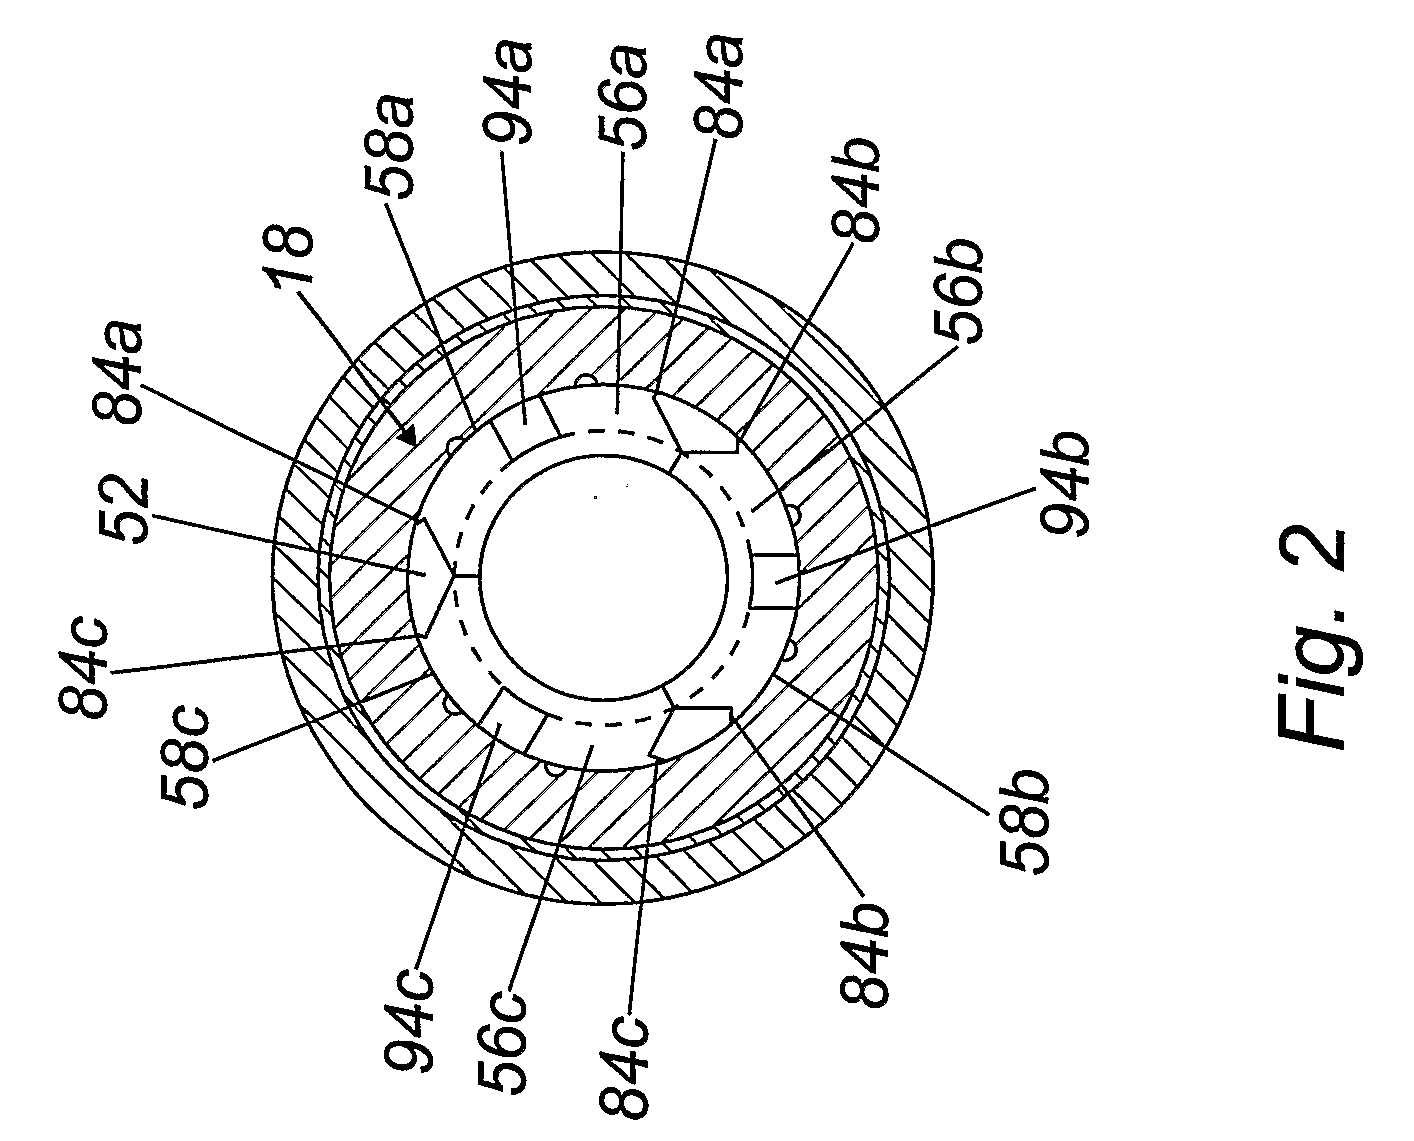 Ball seat assembly and method of controlling fluid flow through a hollow body